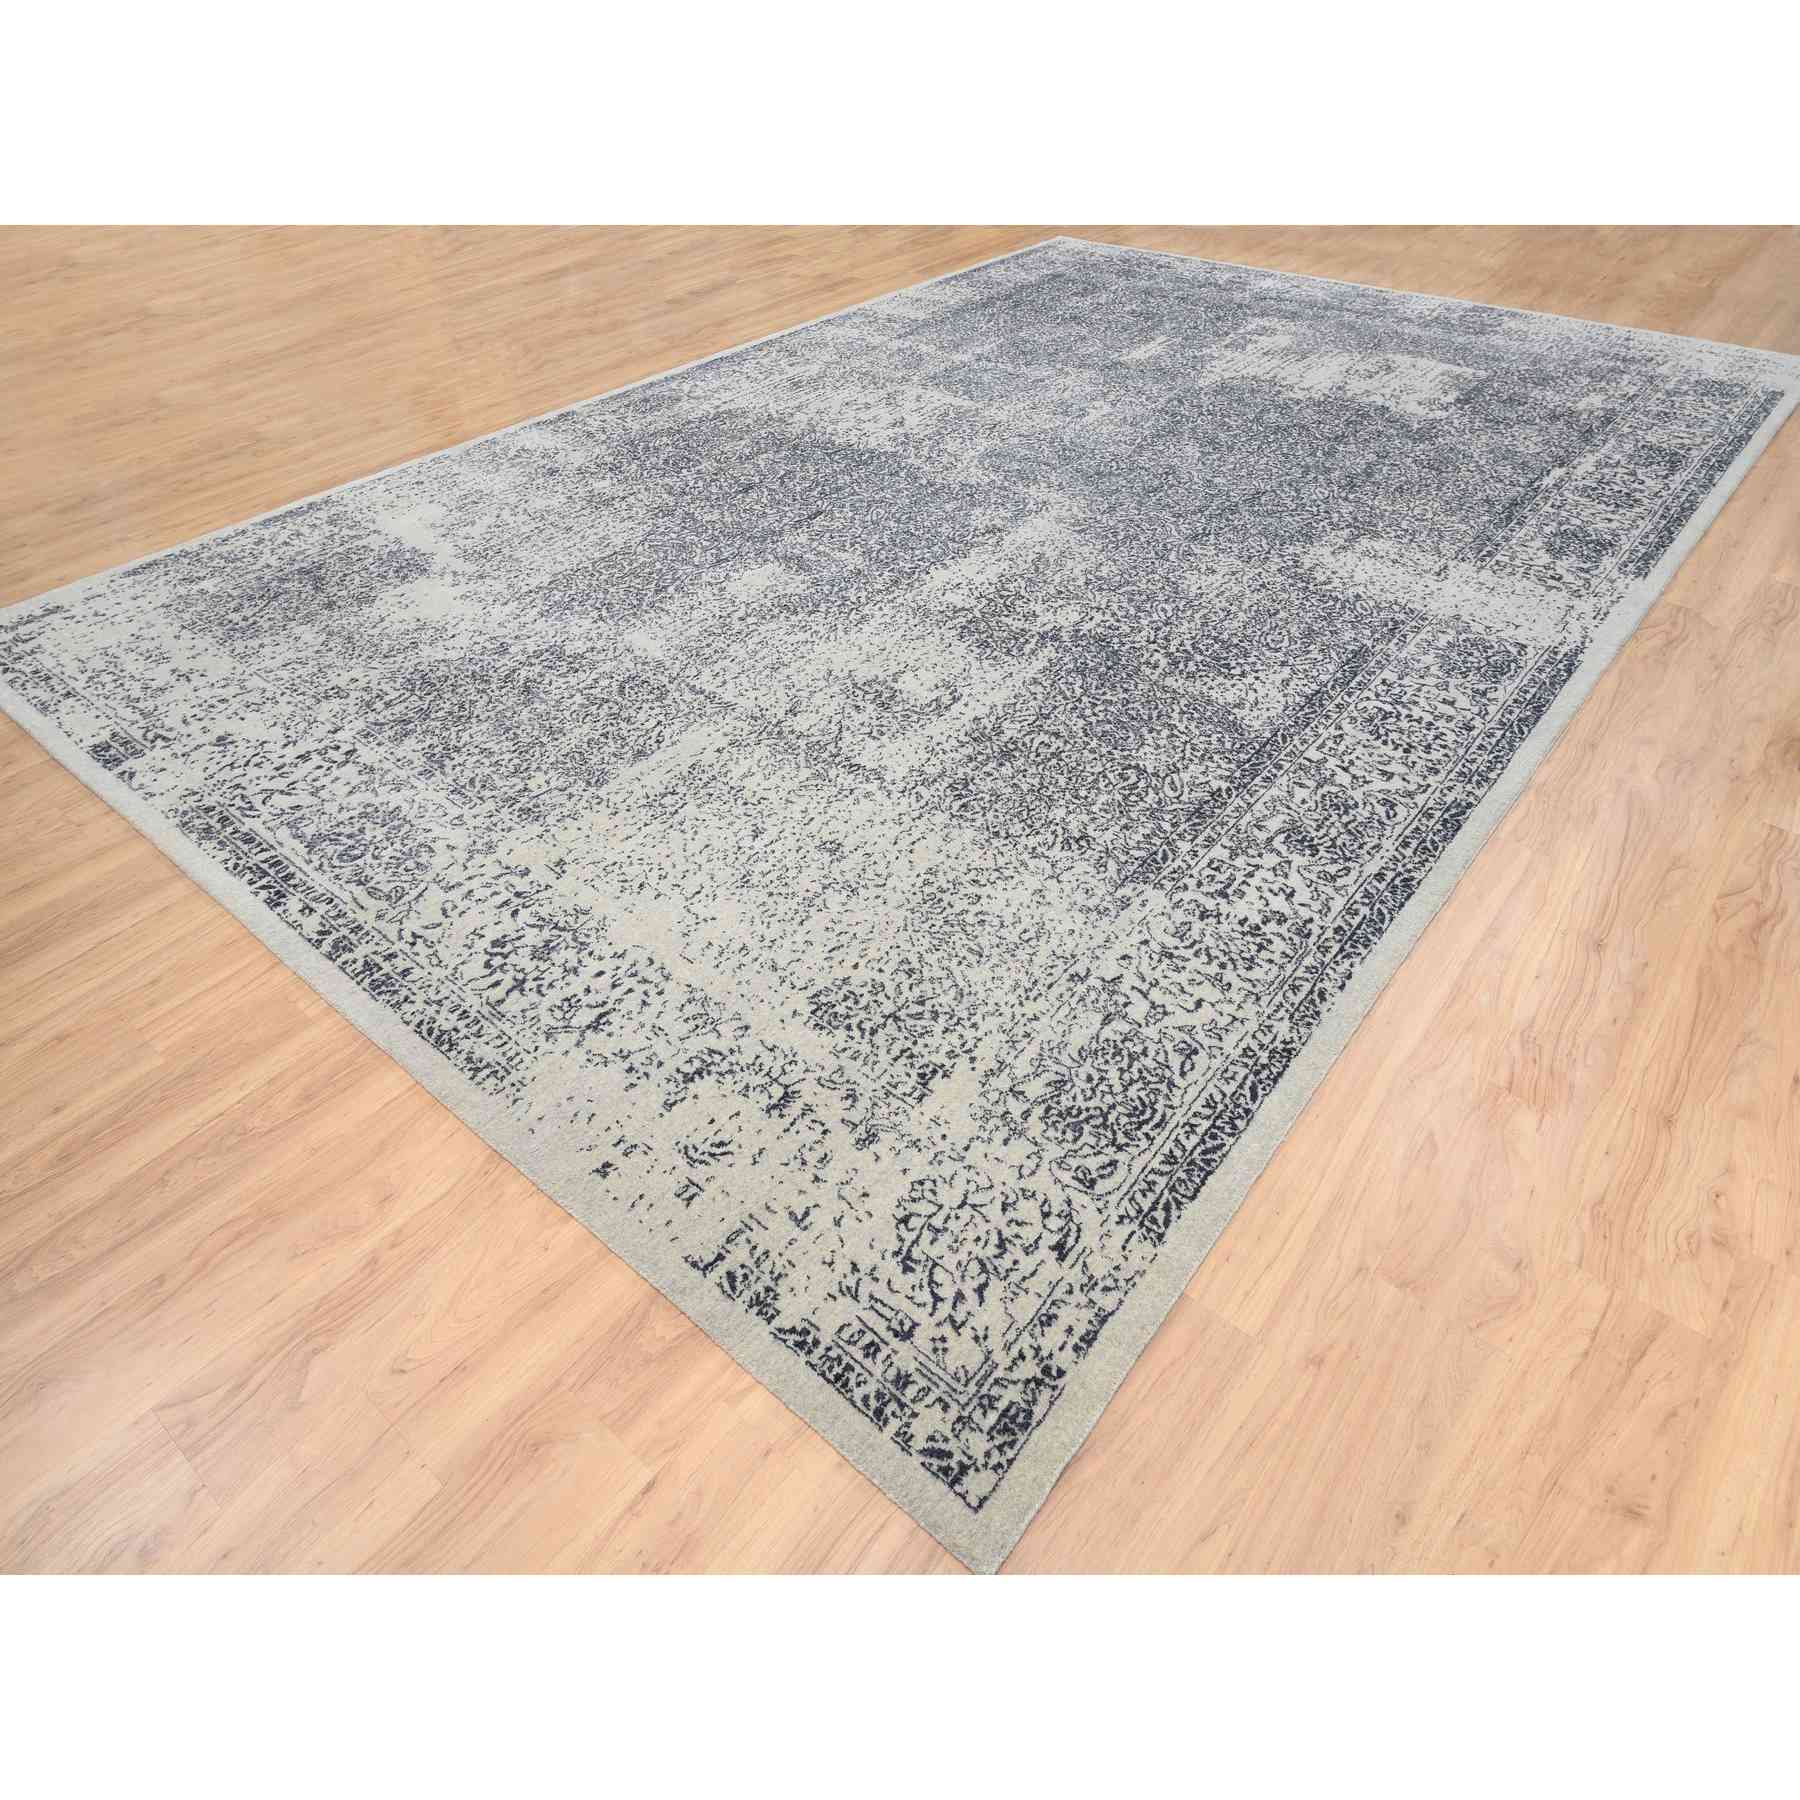 Modern-and-Contemporary-Hand-Loomed-Rug-316525